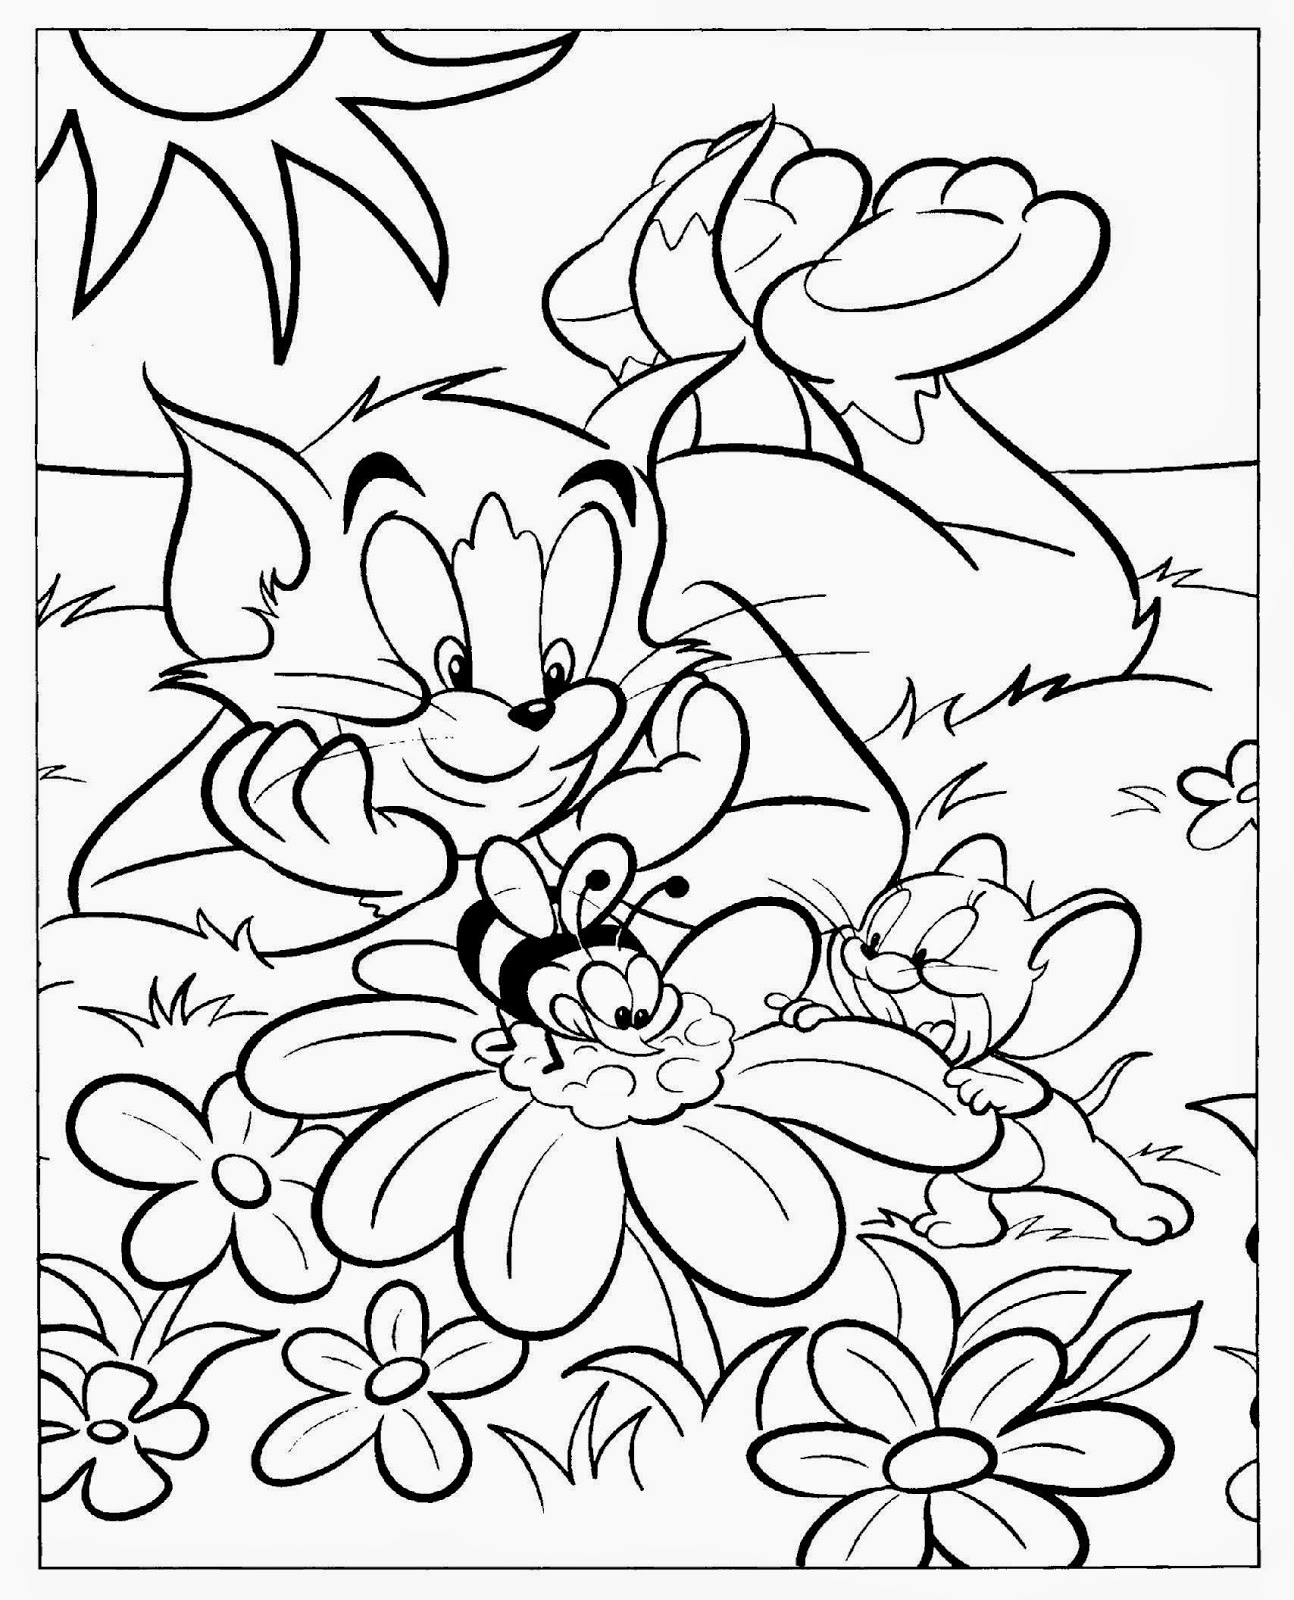 Cartoon Coloring Pages  Free Coloring Sheet